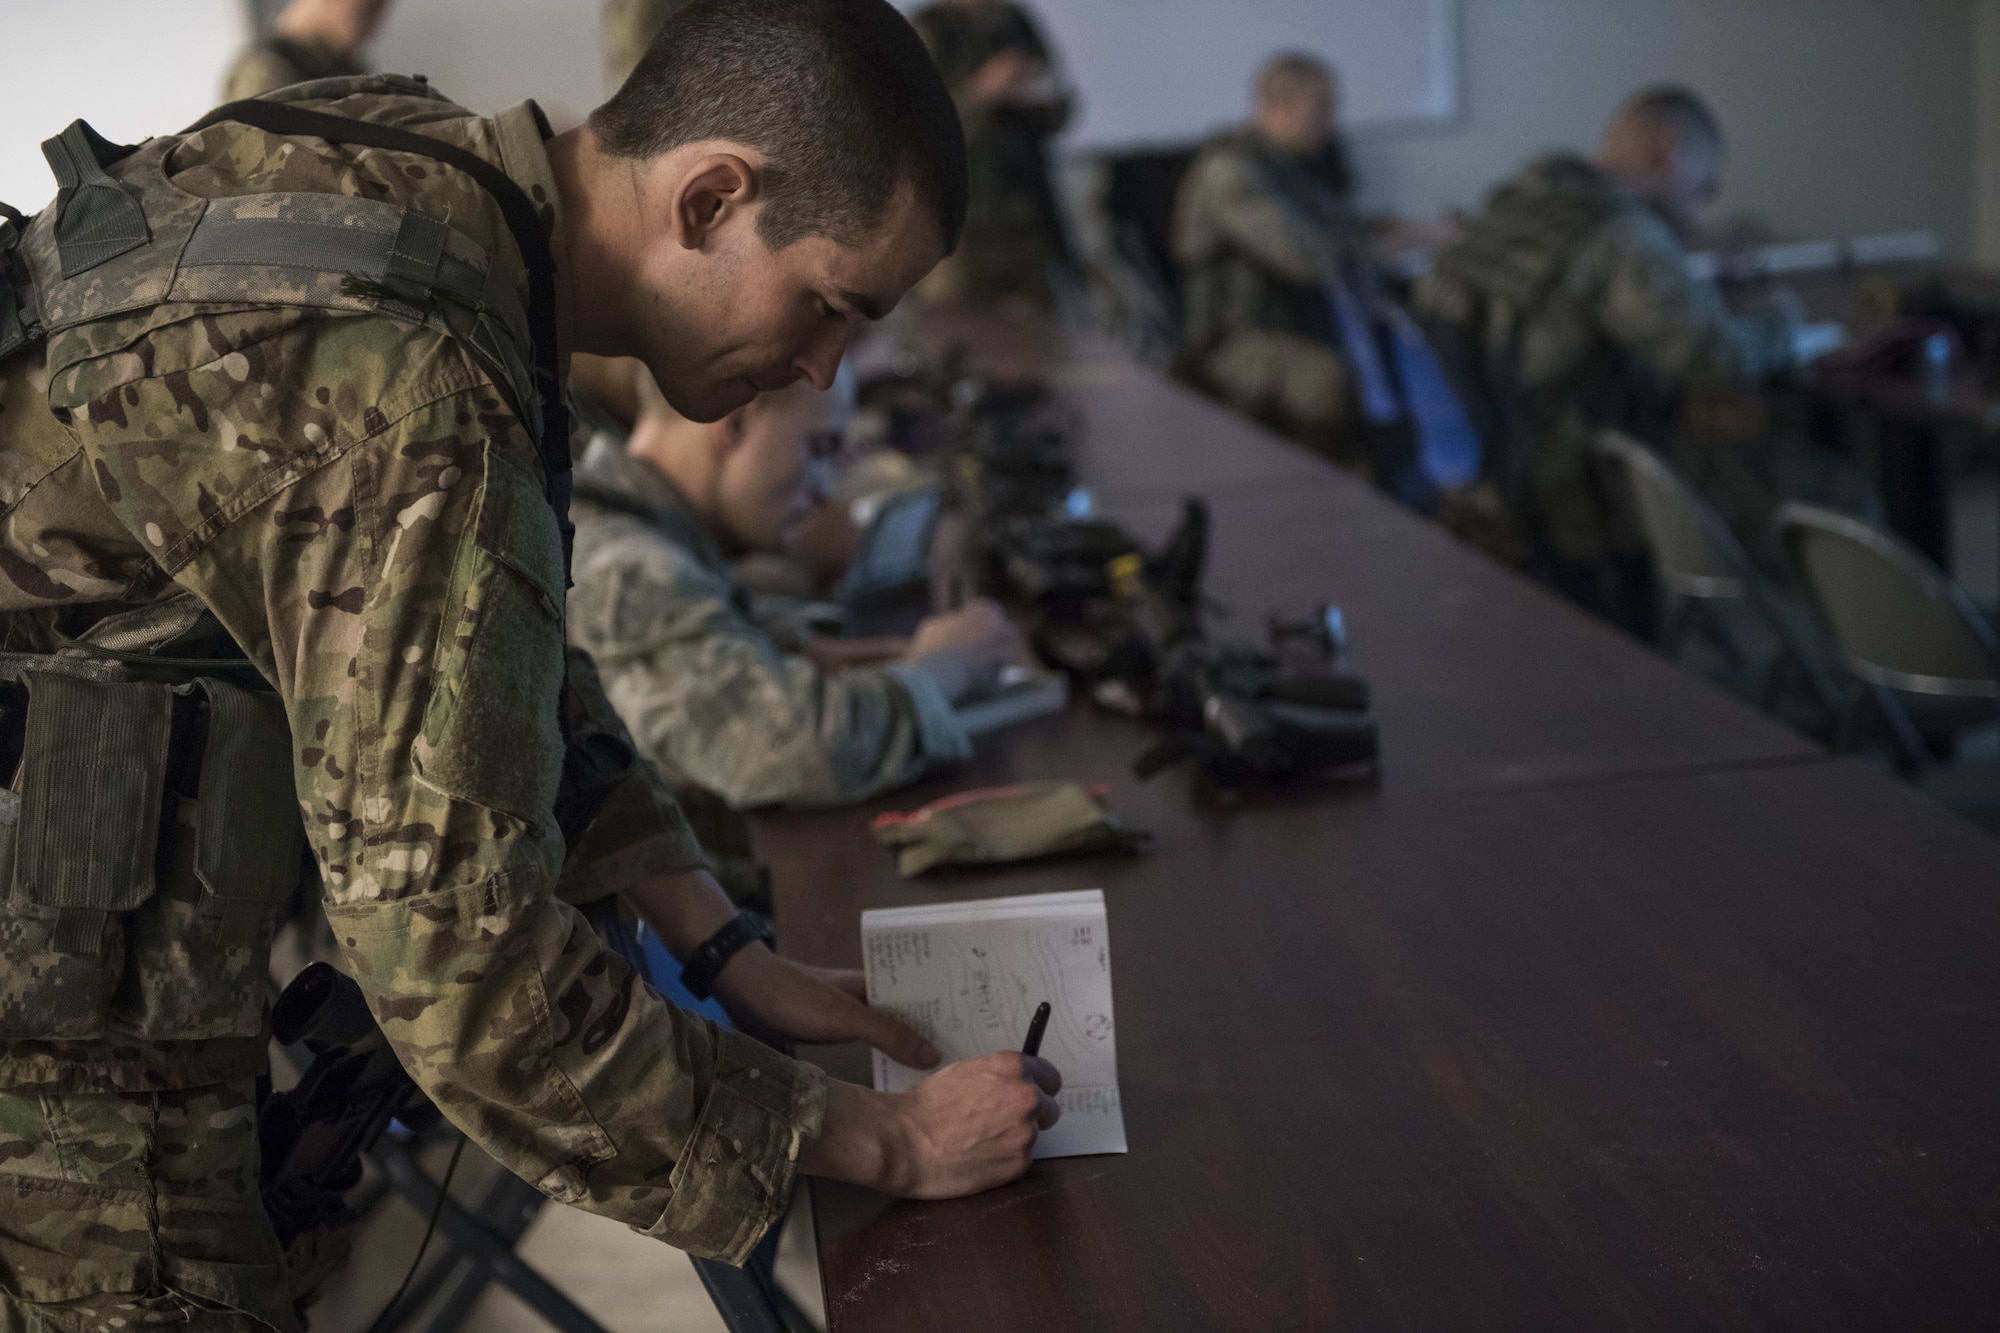 An Airman takes notes during a Pre Ranger Assessment Course, Feb. 11, 2018, at Moody Air Force Base, Ga. The three-day assessment is designed to determine whether Airmen are ready to attend the Air Force Ranger Assessment Course held at Fort Bliss Army Post, Texas. Ranger cadre test Airmen’s physical fitness, tactical abilities, land navigation skills, leadership qualities, water confidence and academic ability to determine if they have the knowledge and will to become Rangers. (U.S. Air Force photo by Senior Airman Janiqua P. Robinson)